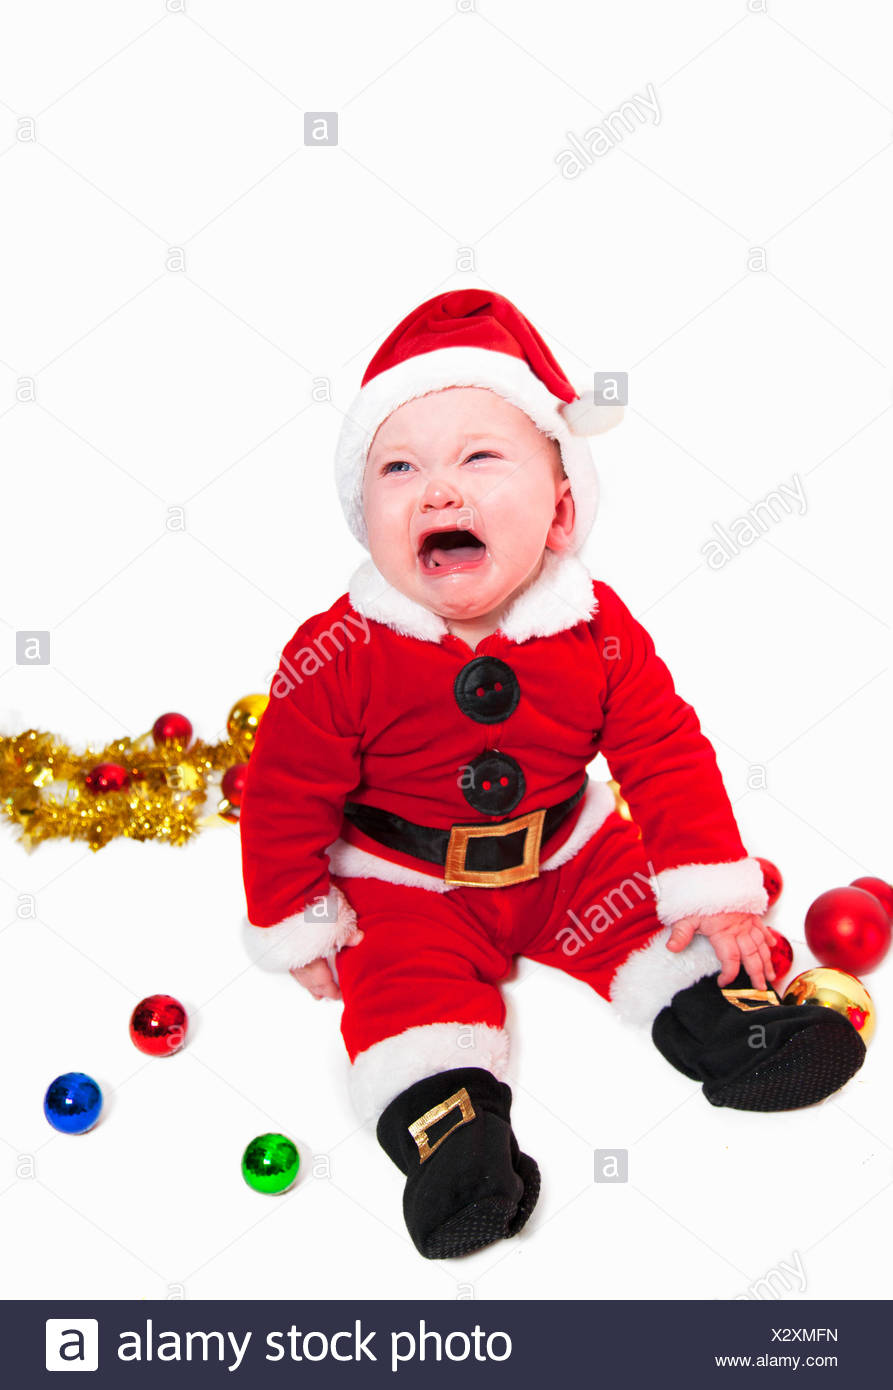 cute-baby-in-father-christmas-outfit-X2XMFN.jpg